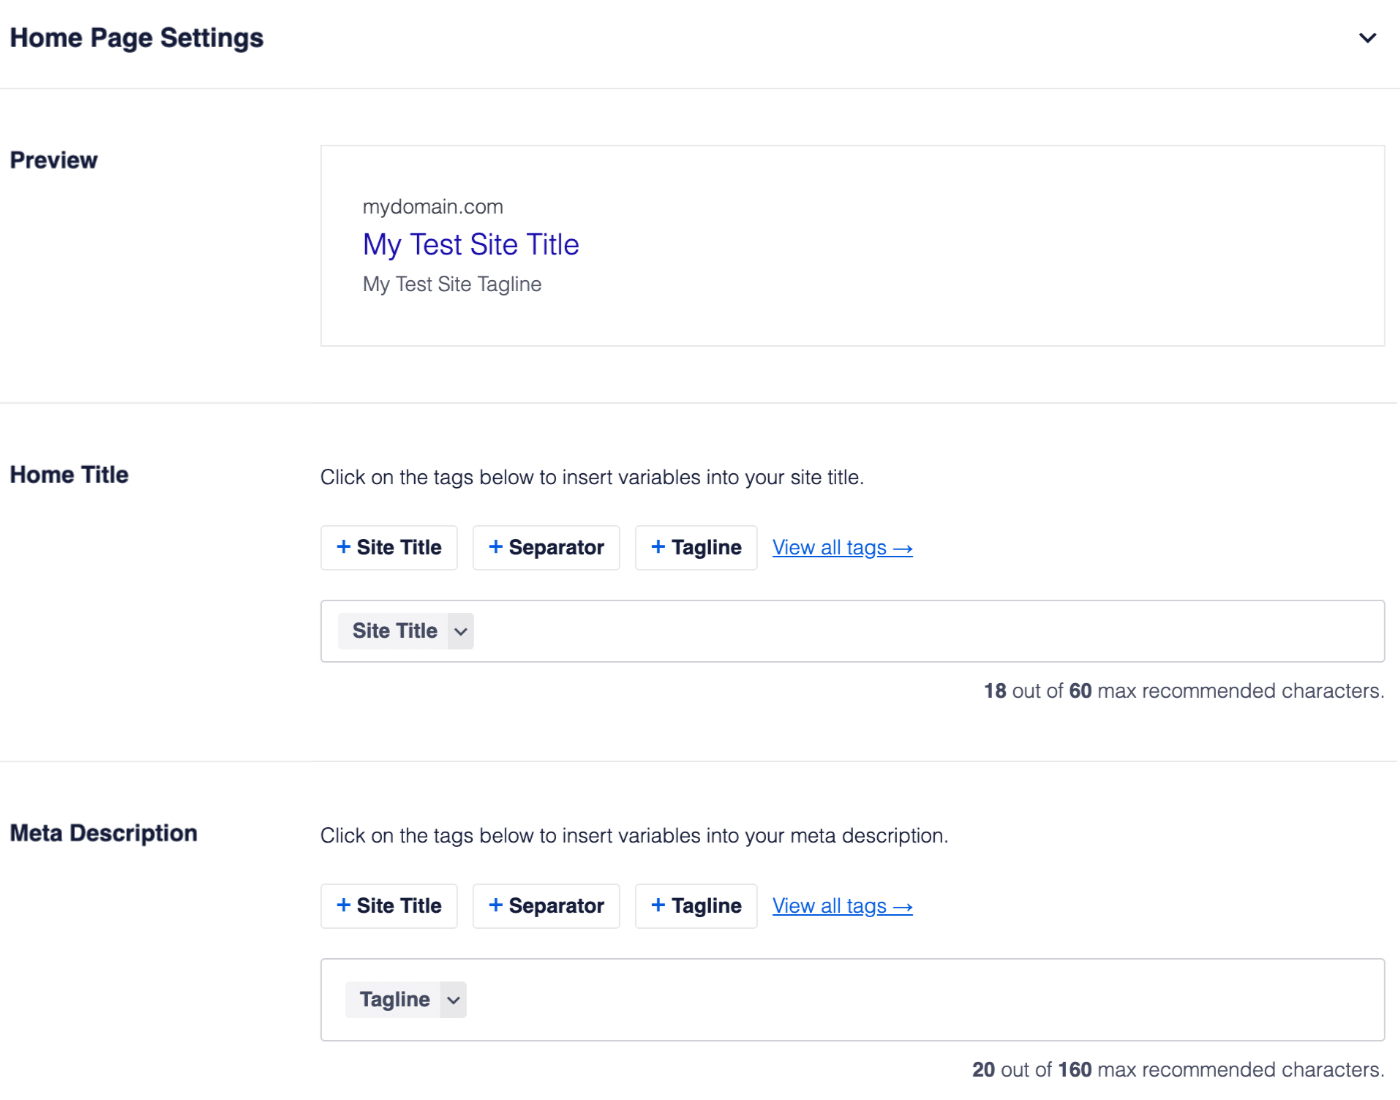 Home Page Settings in All in One SEO